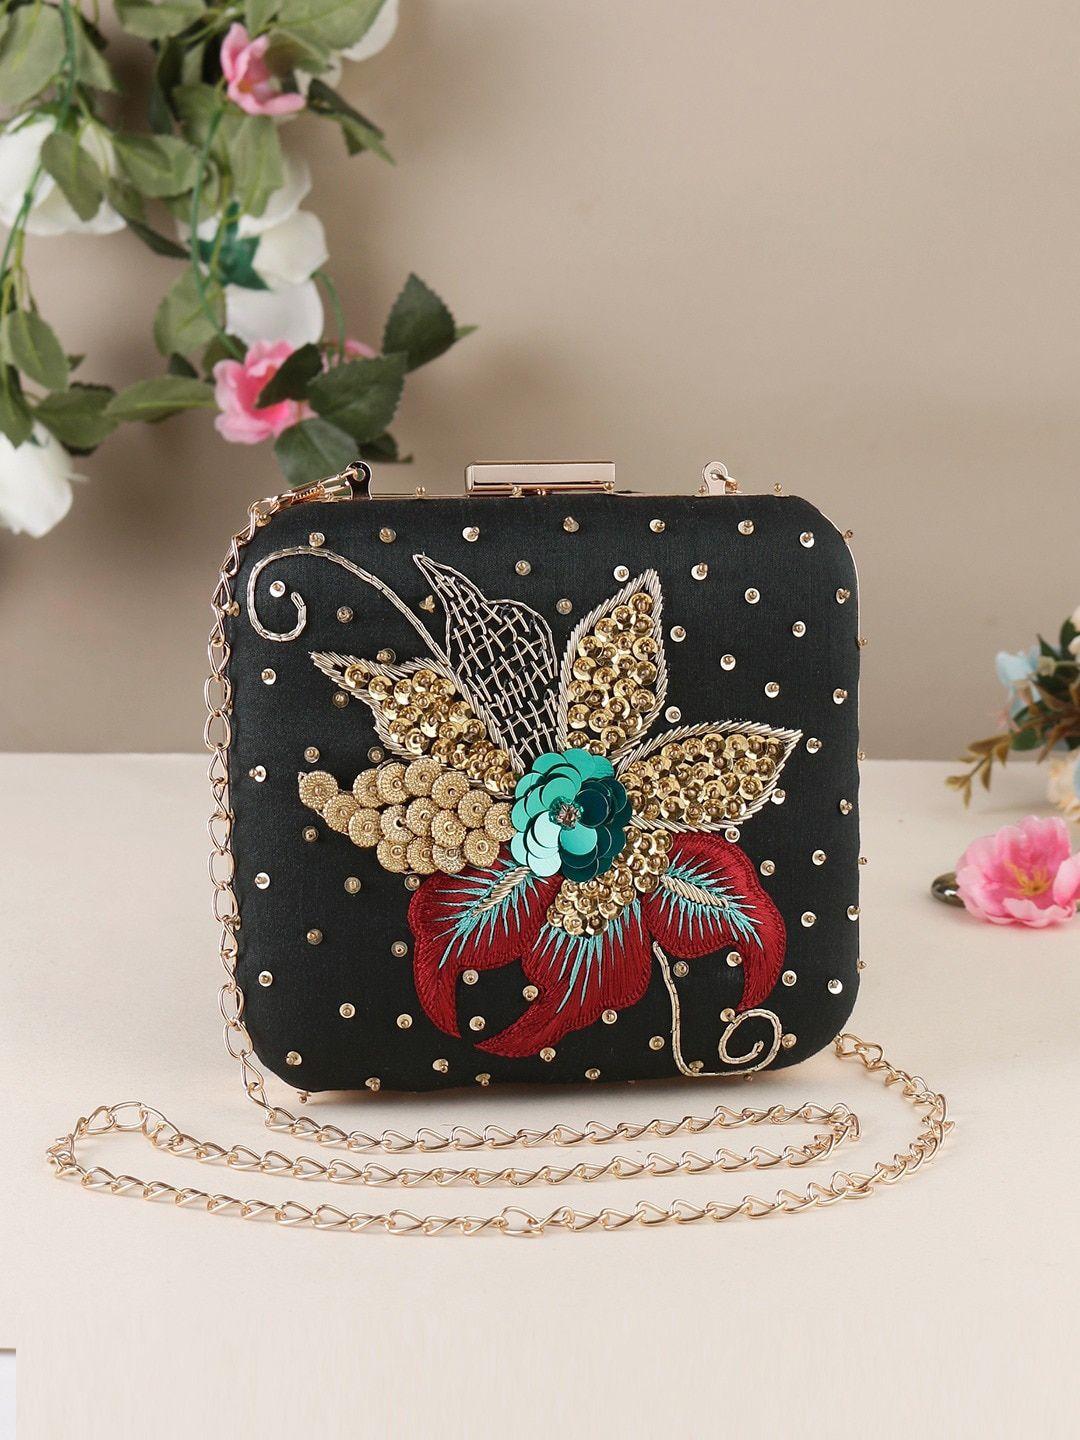 swisni floral embroidered box clutch